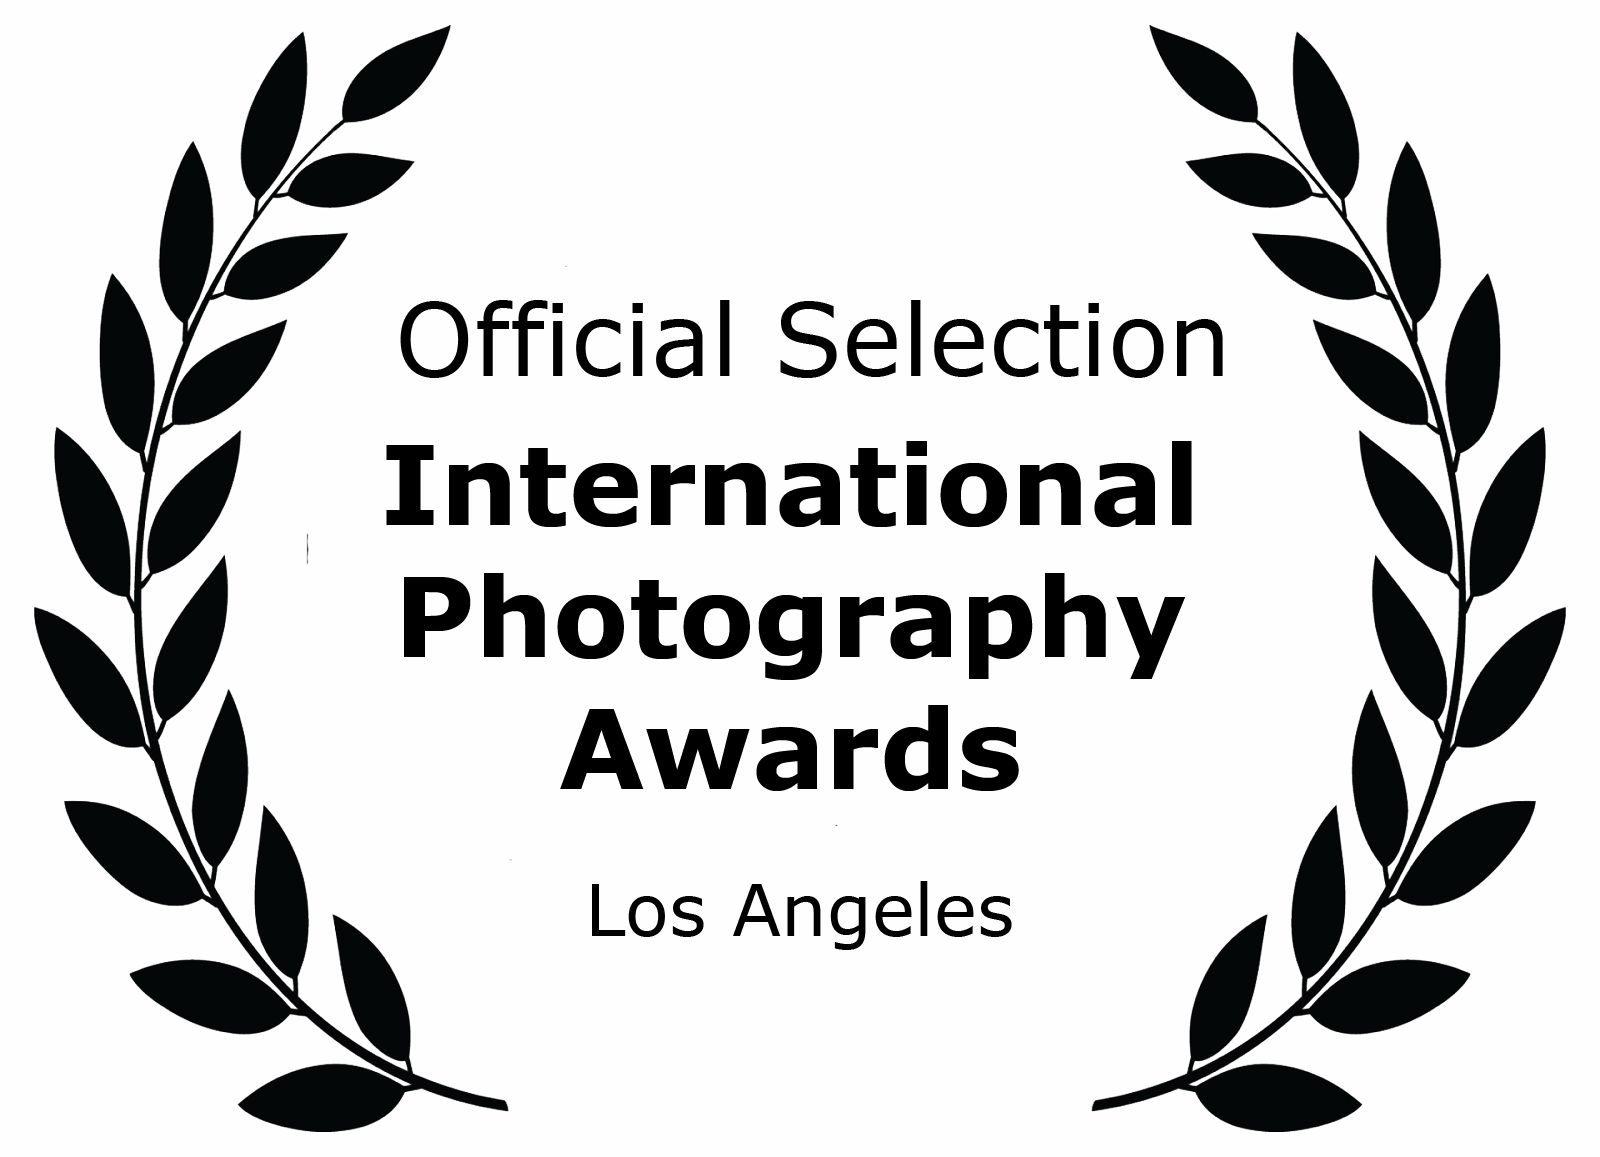 Official Selection International Photography Awards Los Angeles